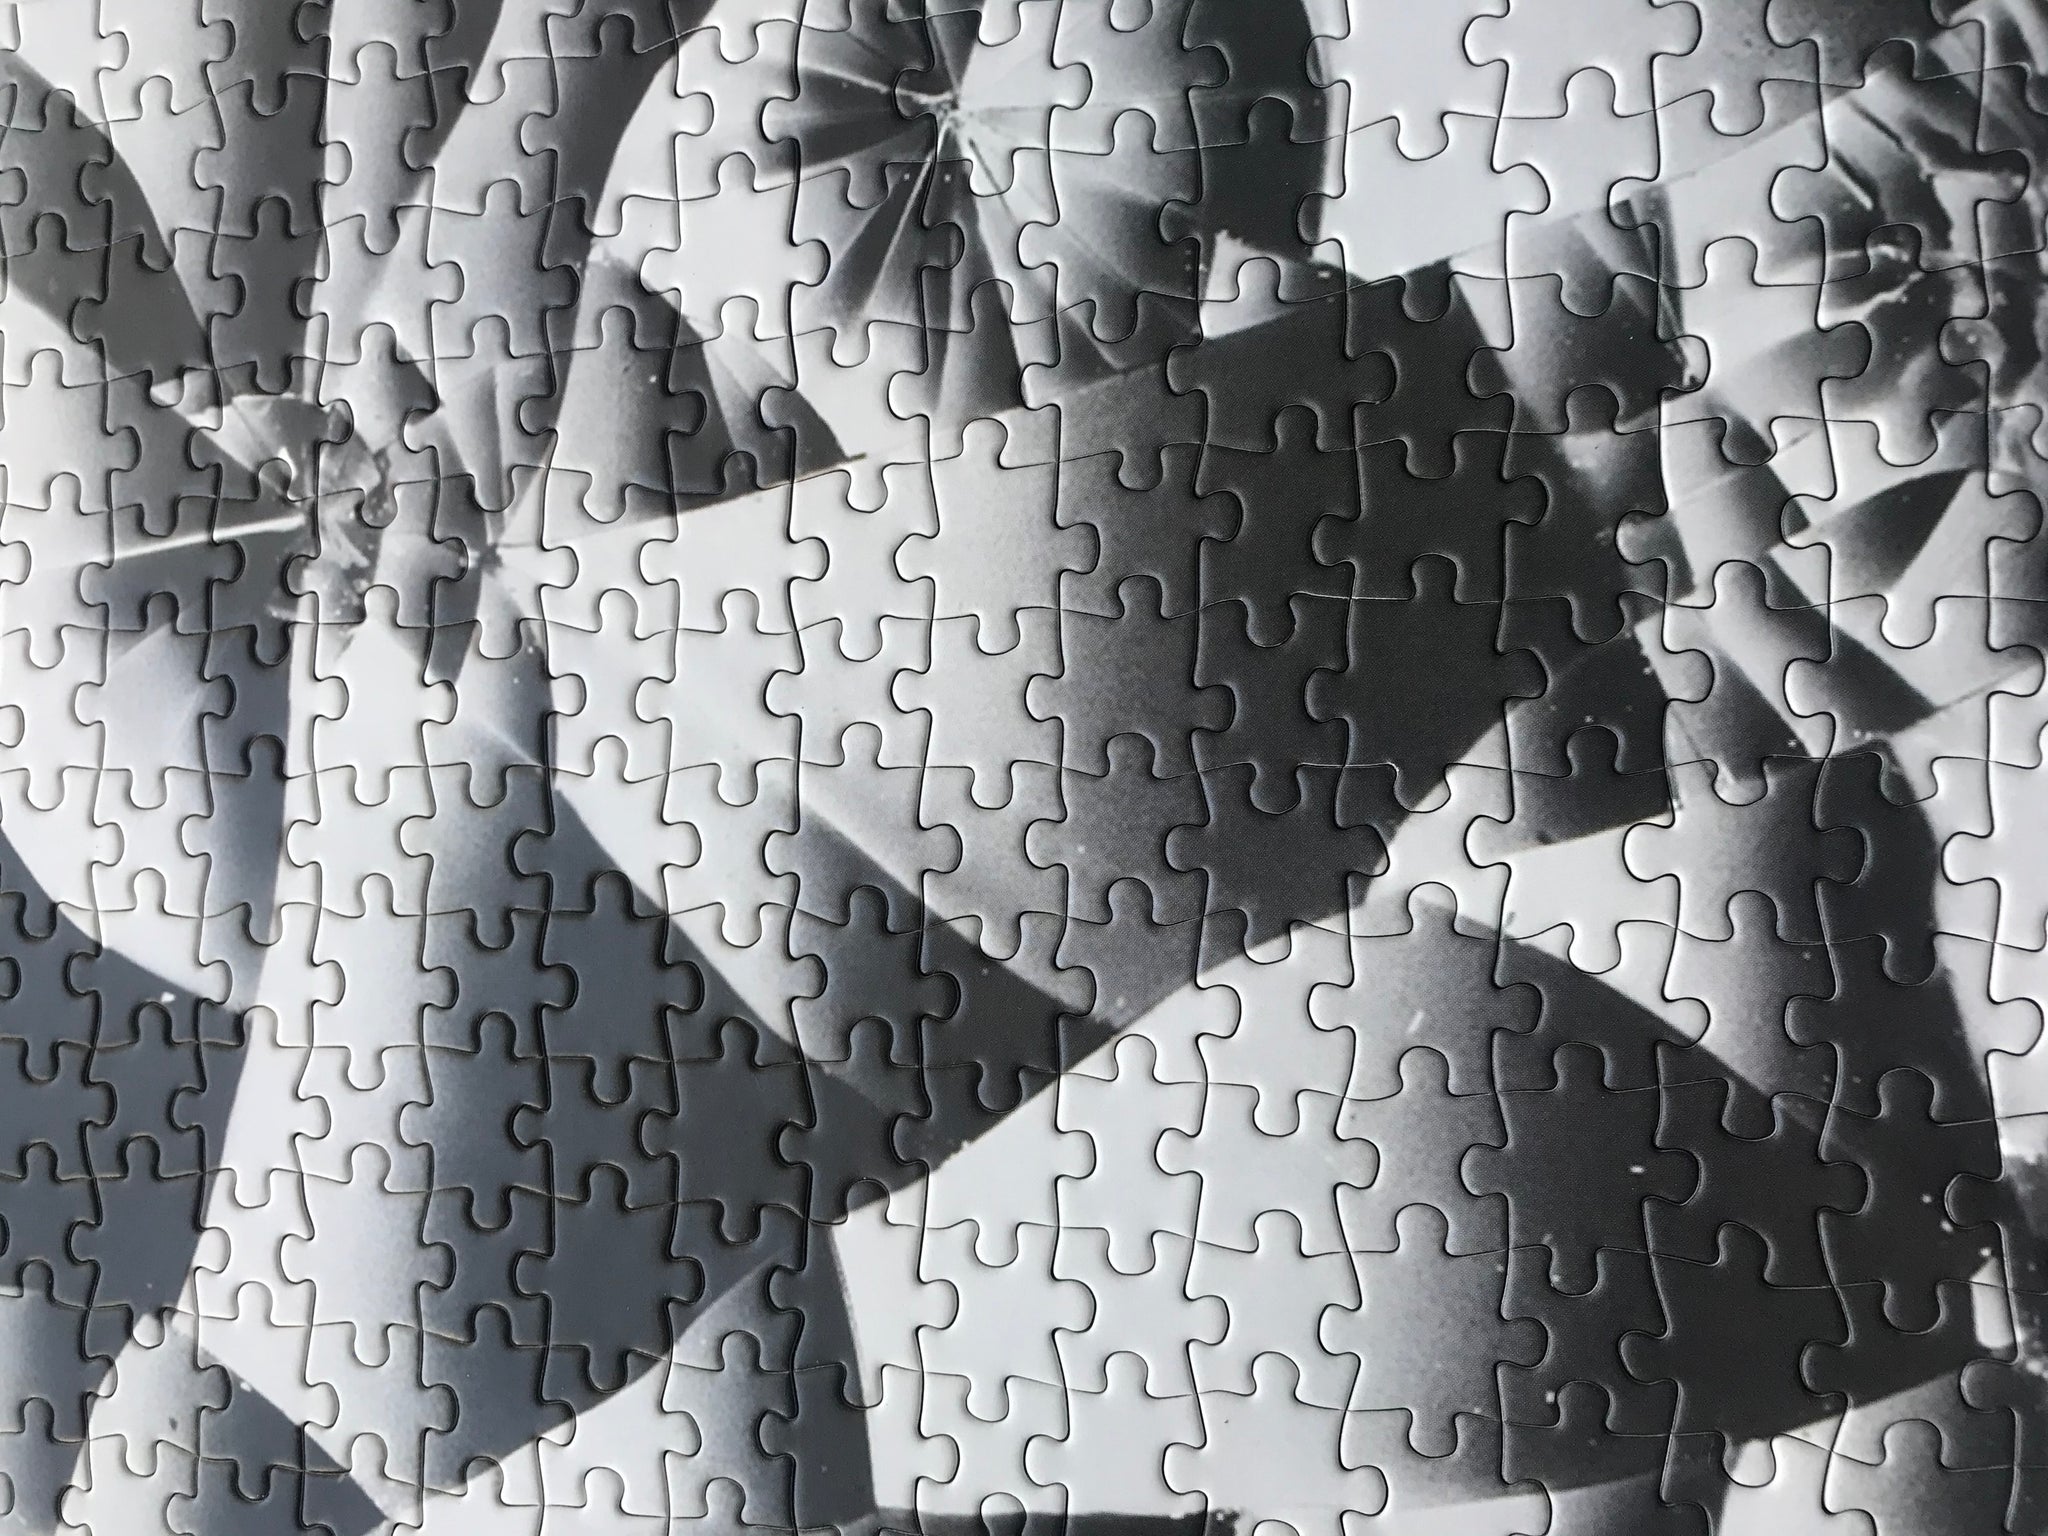 Artist Tauba Auerbach Puzzle: Unlimited Collector Edition Jigsaw Puzzle